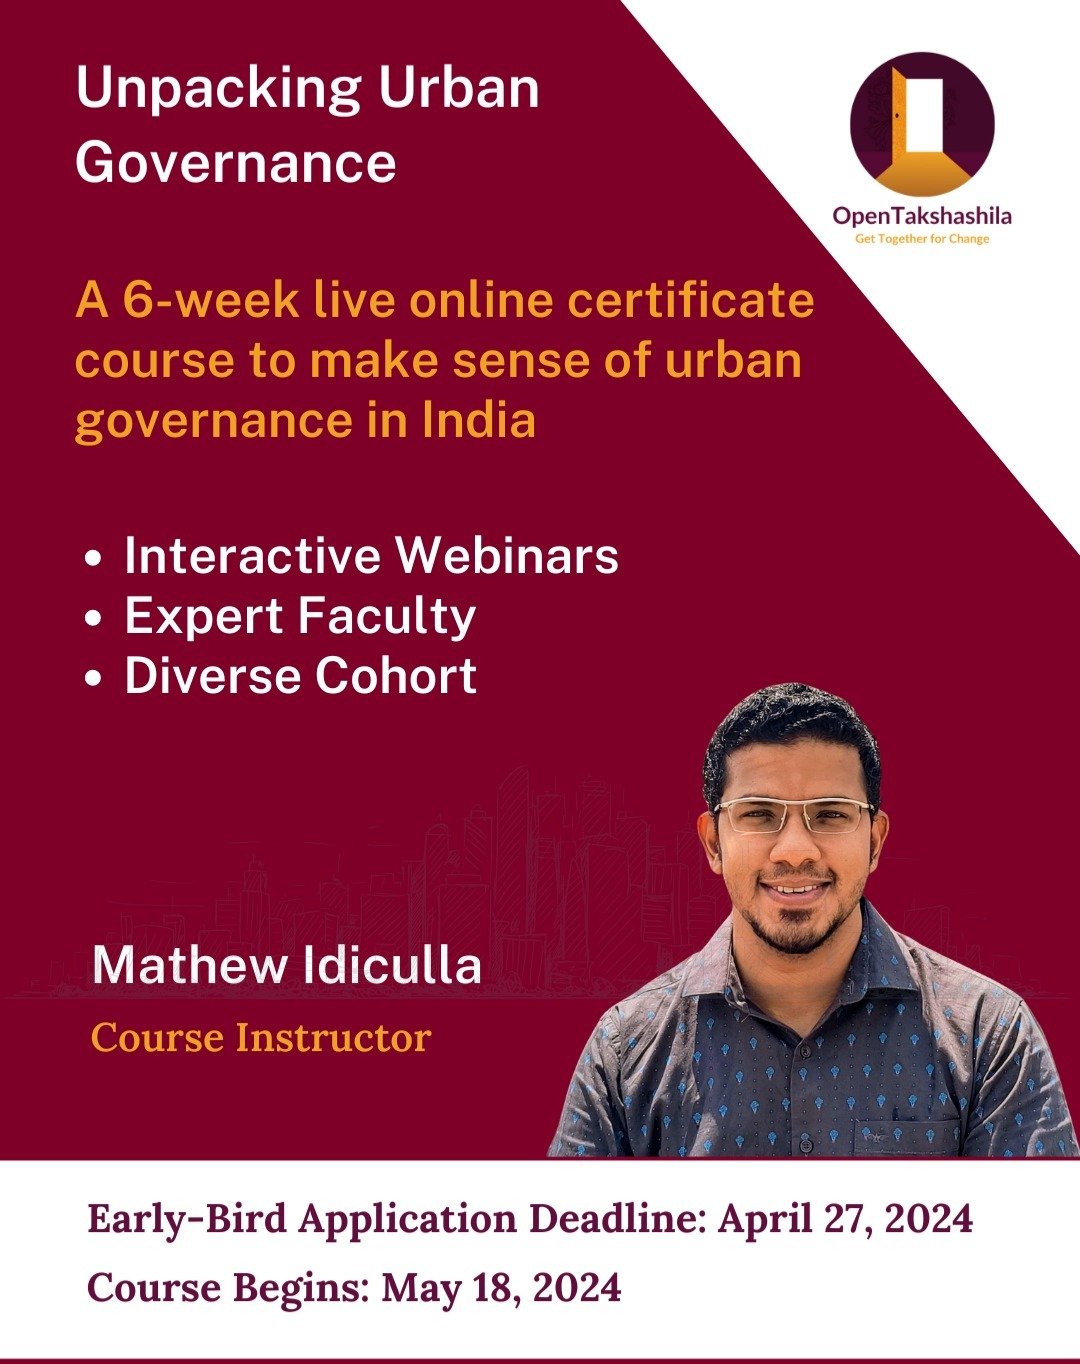 Why is urban governance in India so messy? Can citizens meaningfully participate in urban governance? How can India&rsquo;s urban governance challenges be addressed? 

If you are searching for answers to these, join- Unpacking Urban Governance- a 6-w